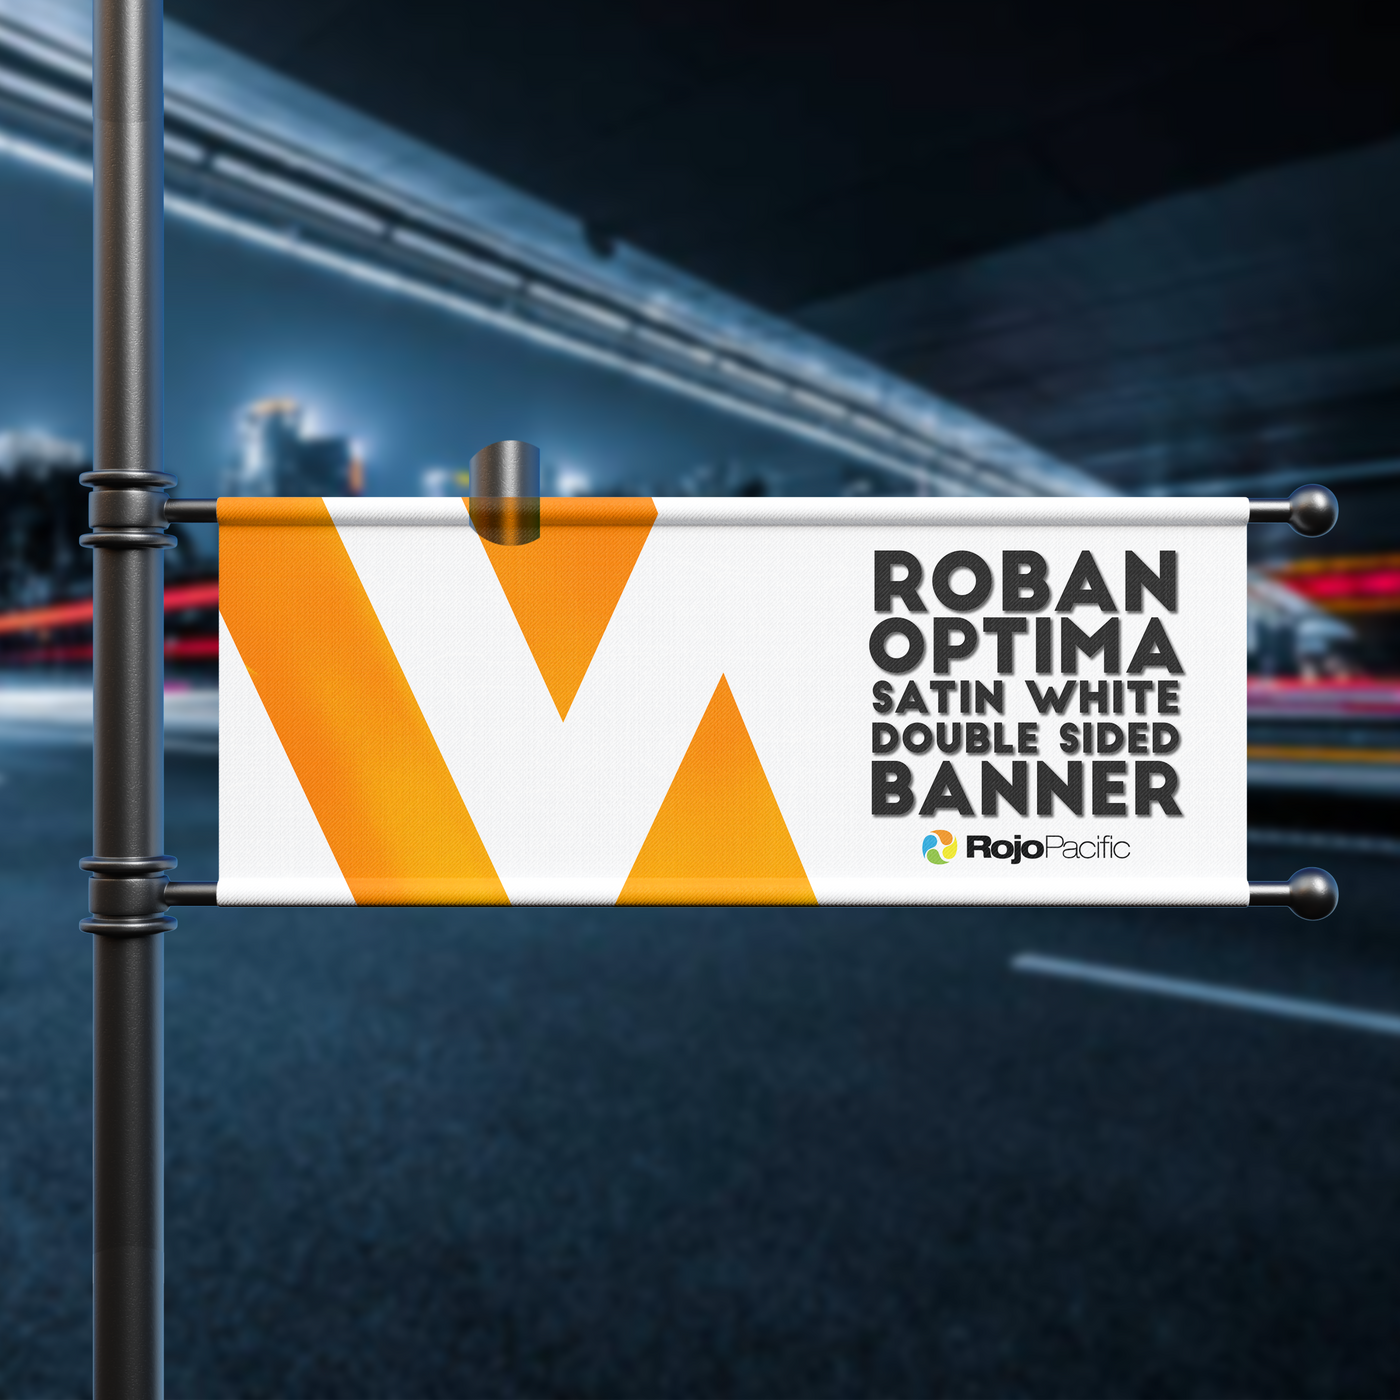 Roban Optima Matte Double Sided Banner